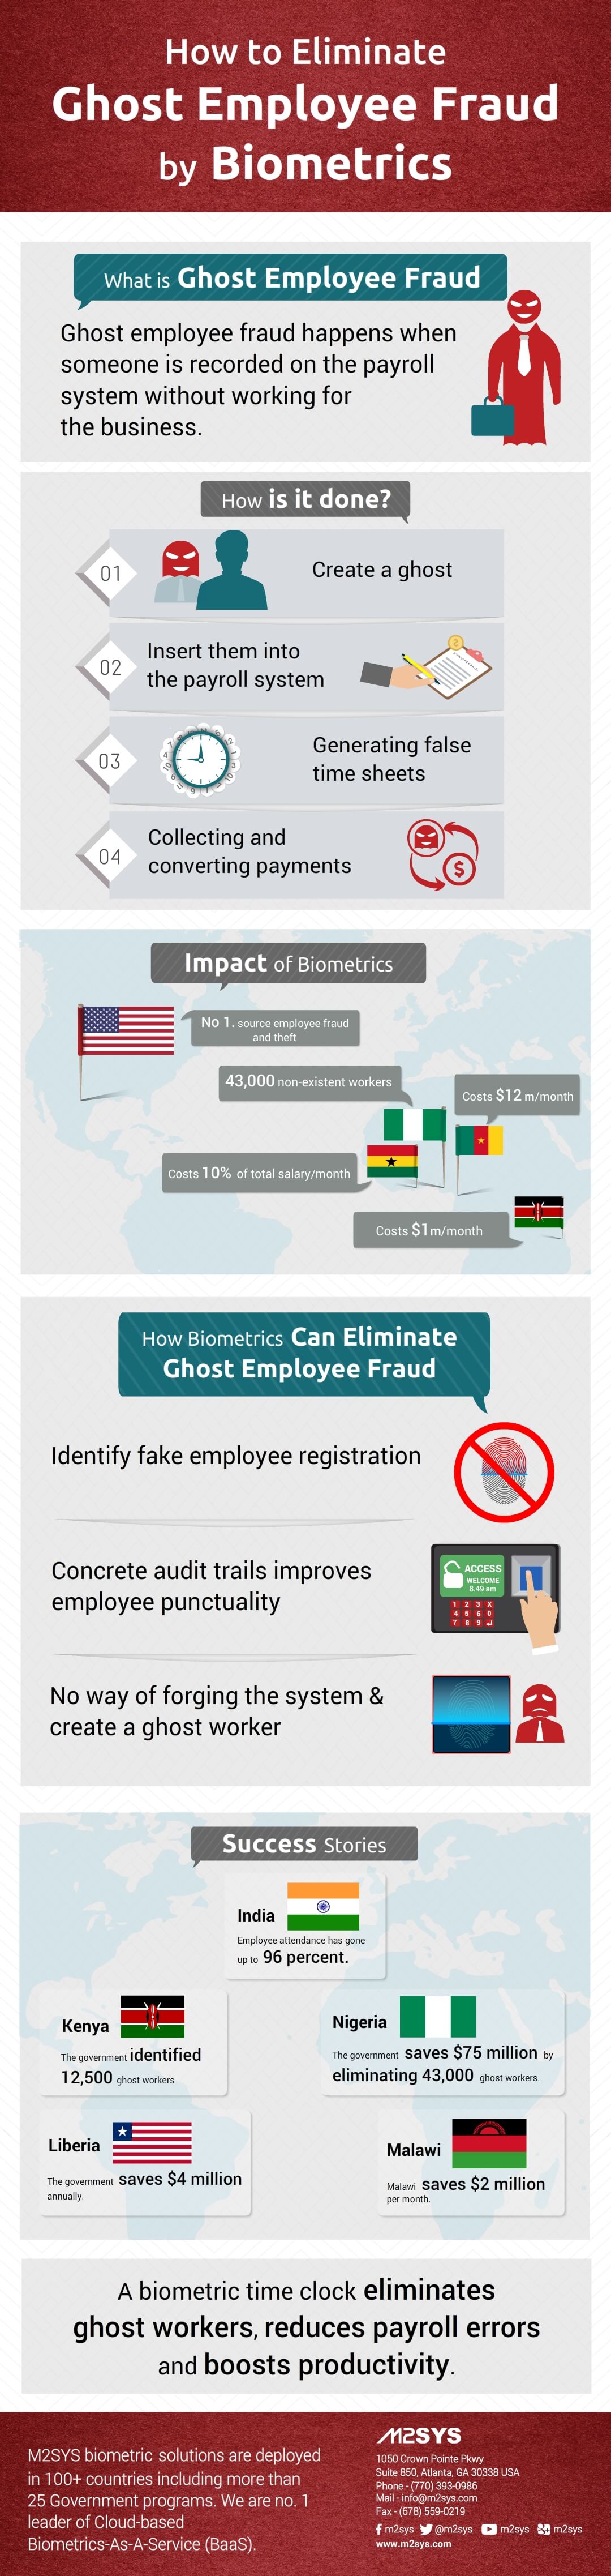 how-to-eliminate-ghost-employee-fraud-by-biometrics-infographic-plaza